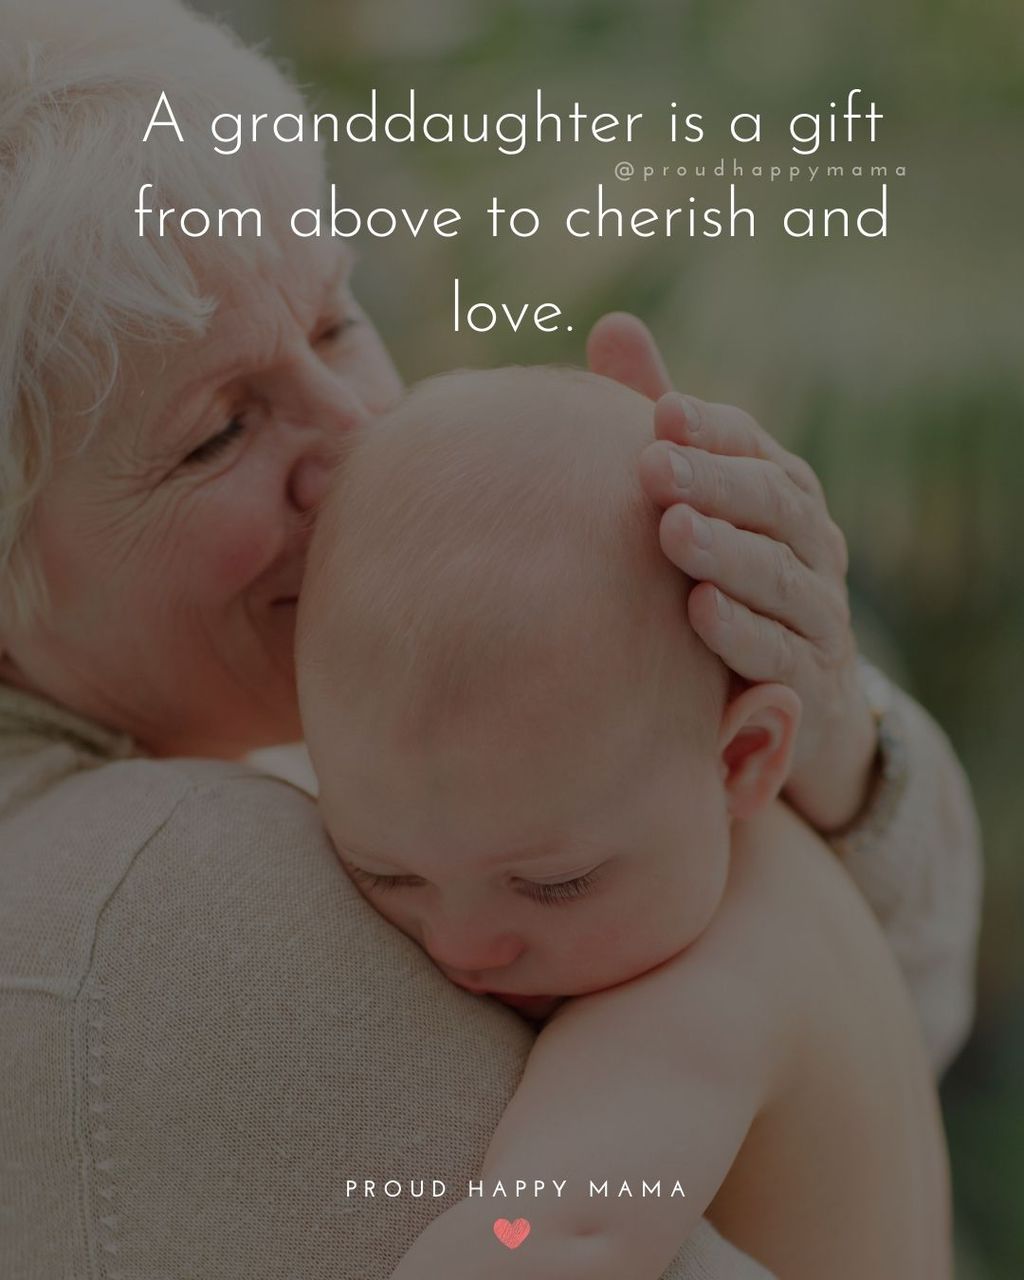 Grandmother kissing baby granddaughters head whilst in her holding her in her arms. With short granddaughter quote text overlay, ‘A granddaughter is a gift from above to cherish and love.’